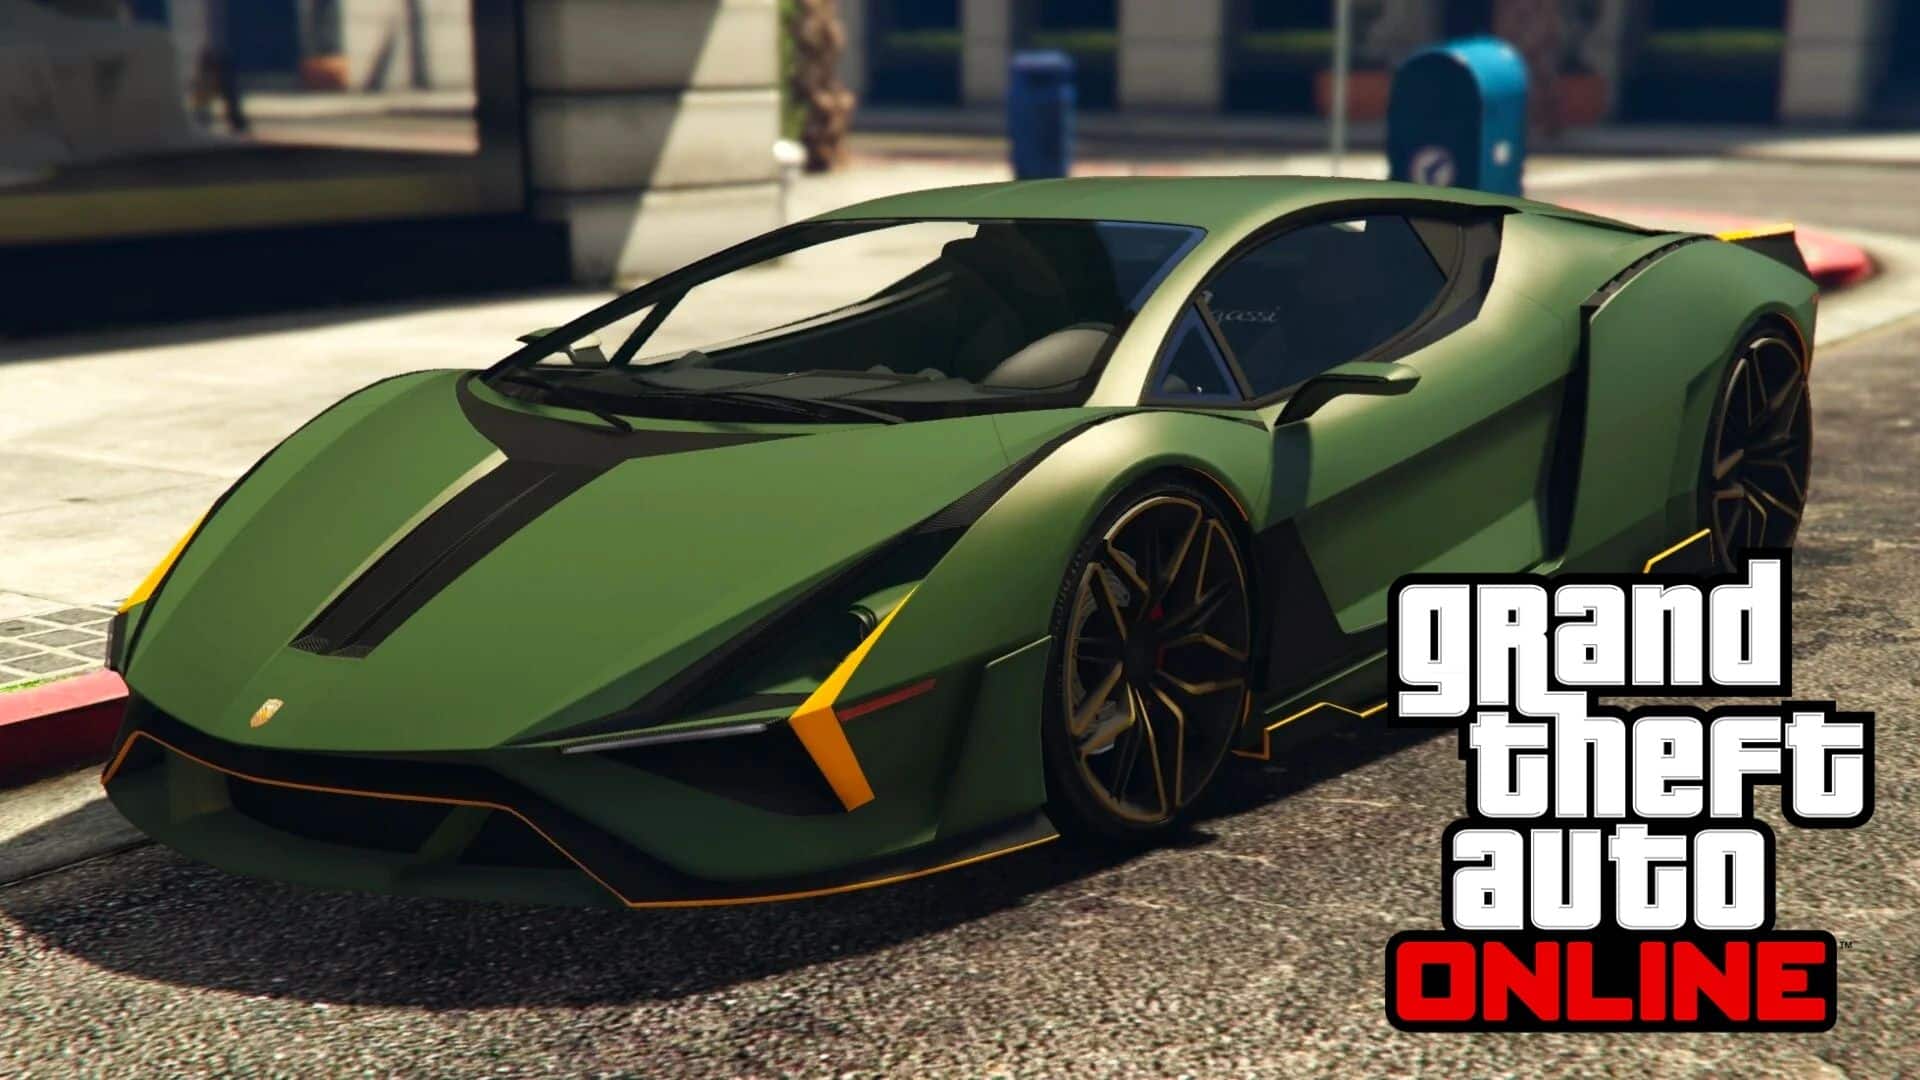 GTA Online Players Transferring from PS4 Get a Free Car Supercharged for PS5